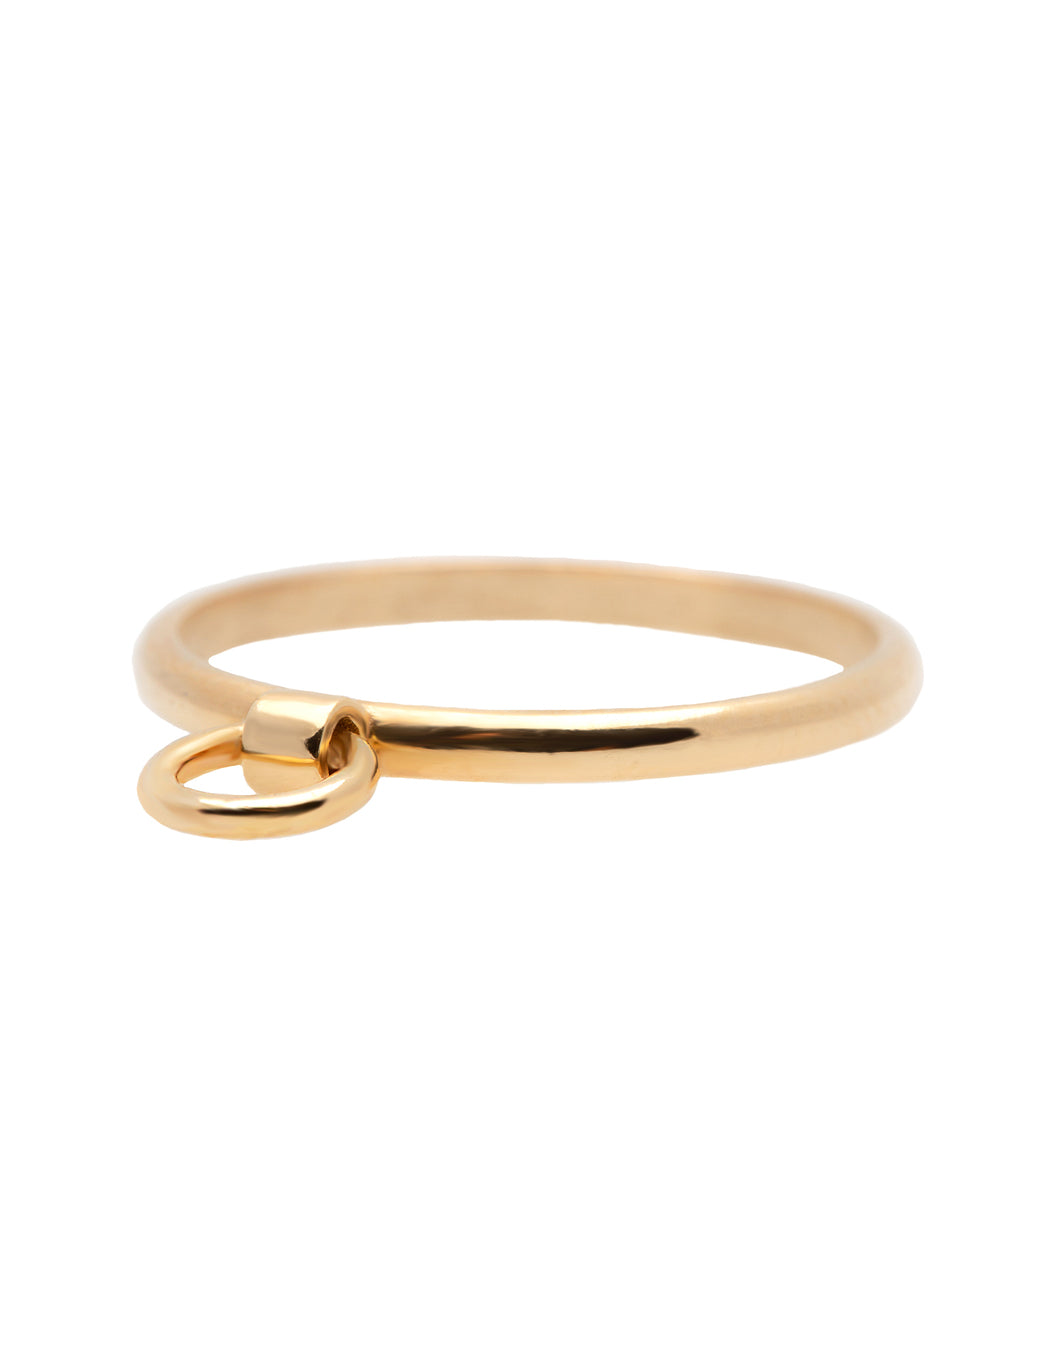 A dainty 14k yellow gold ring, with a hanging hoop.  